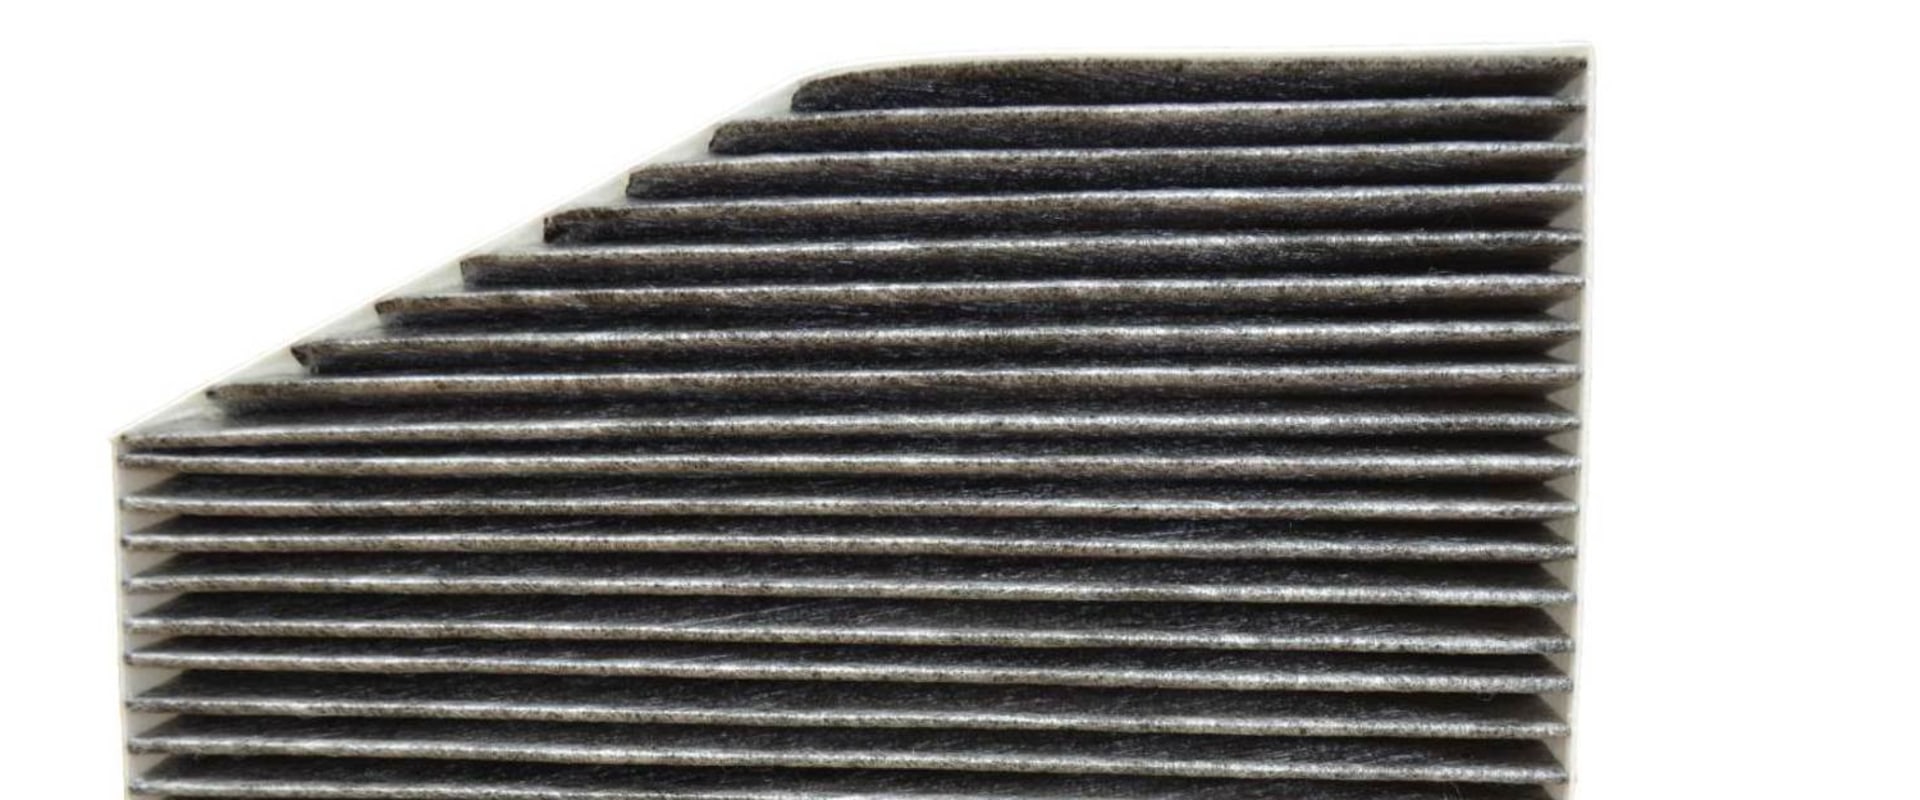 Cabin Air Filter Size Chart: Everything You Need to Know